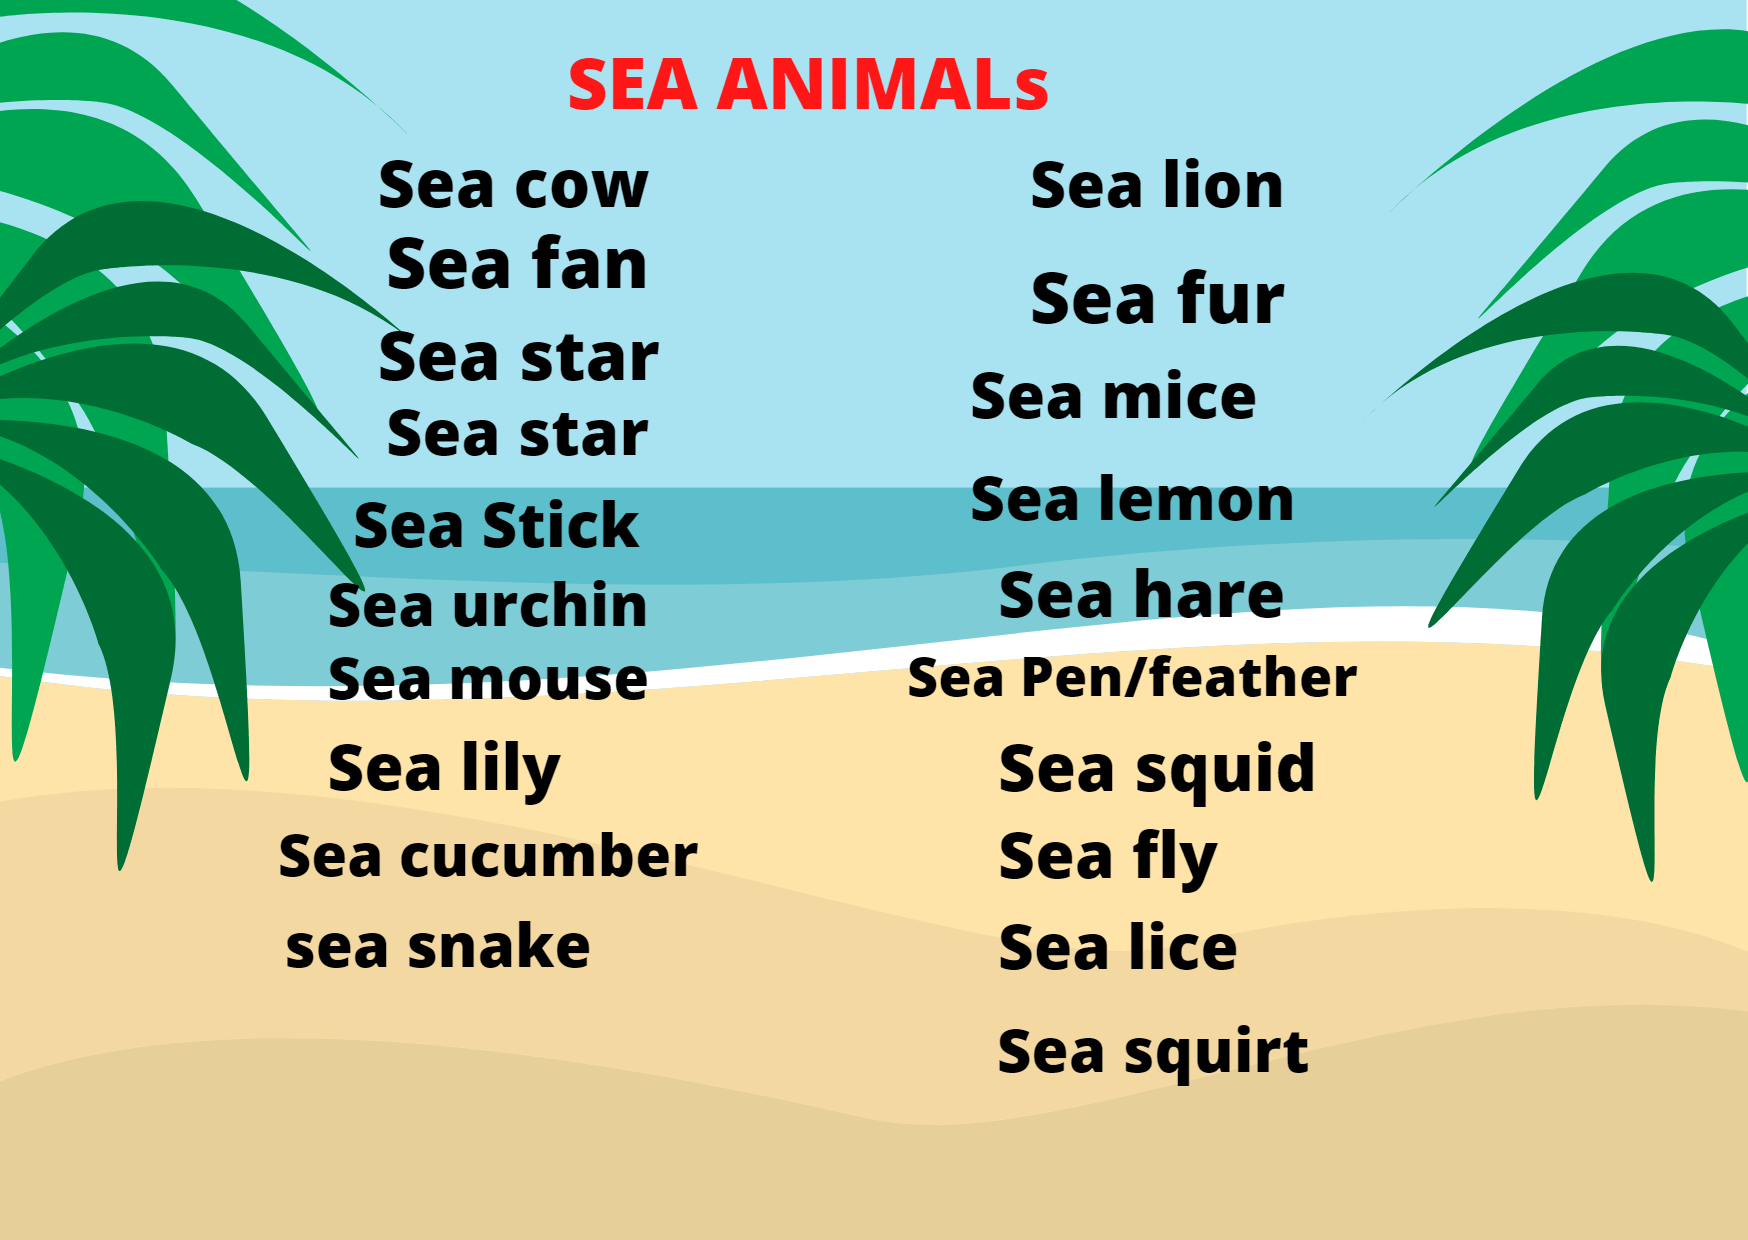 Sea Animals |Examples and Phylum it Belongs